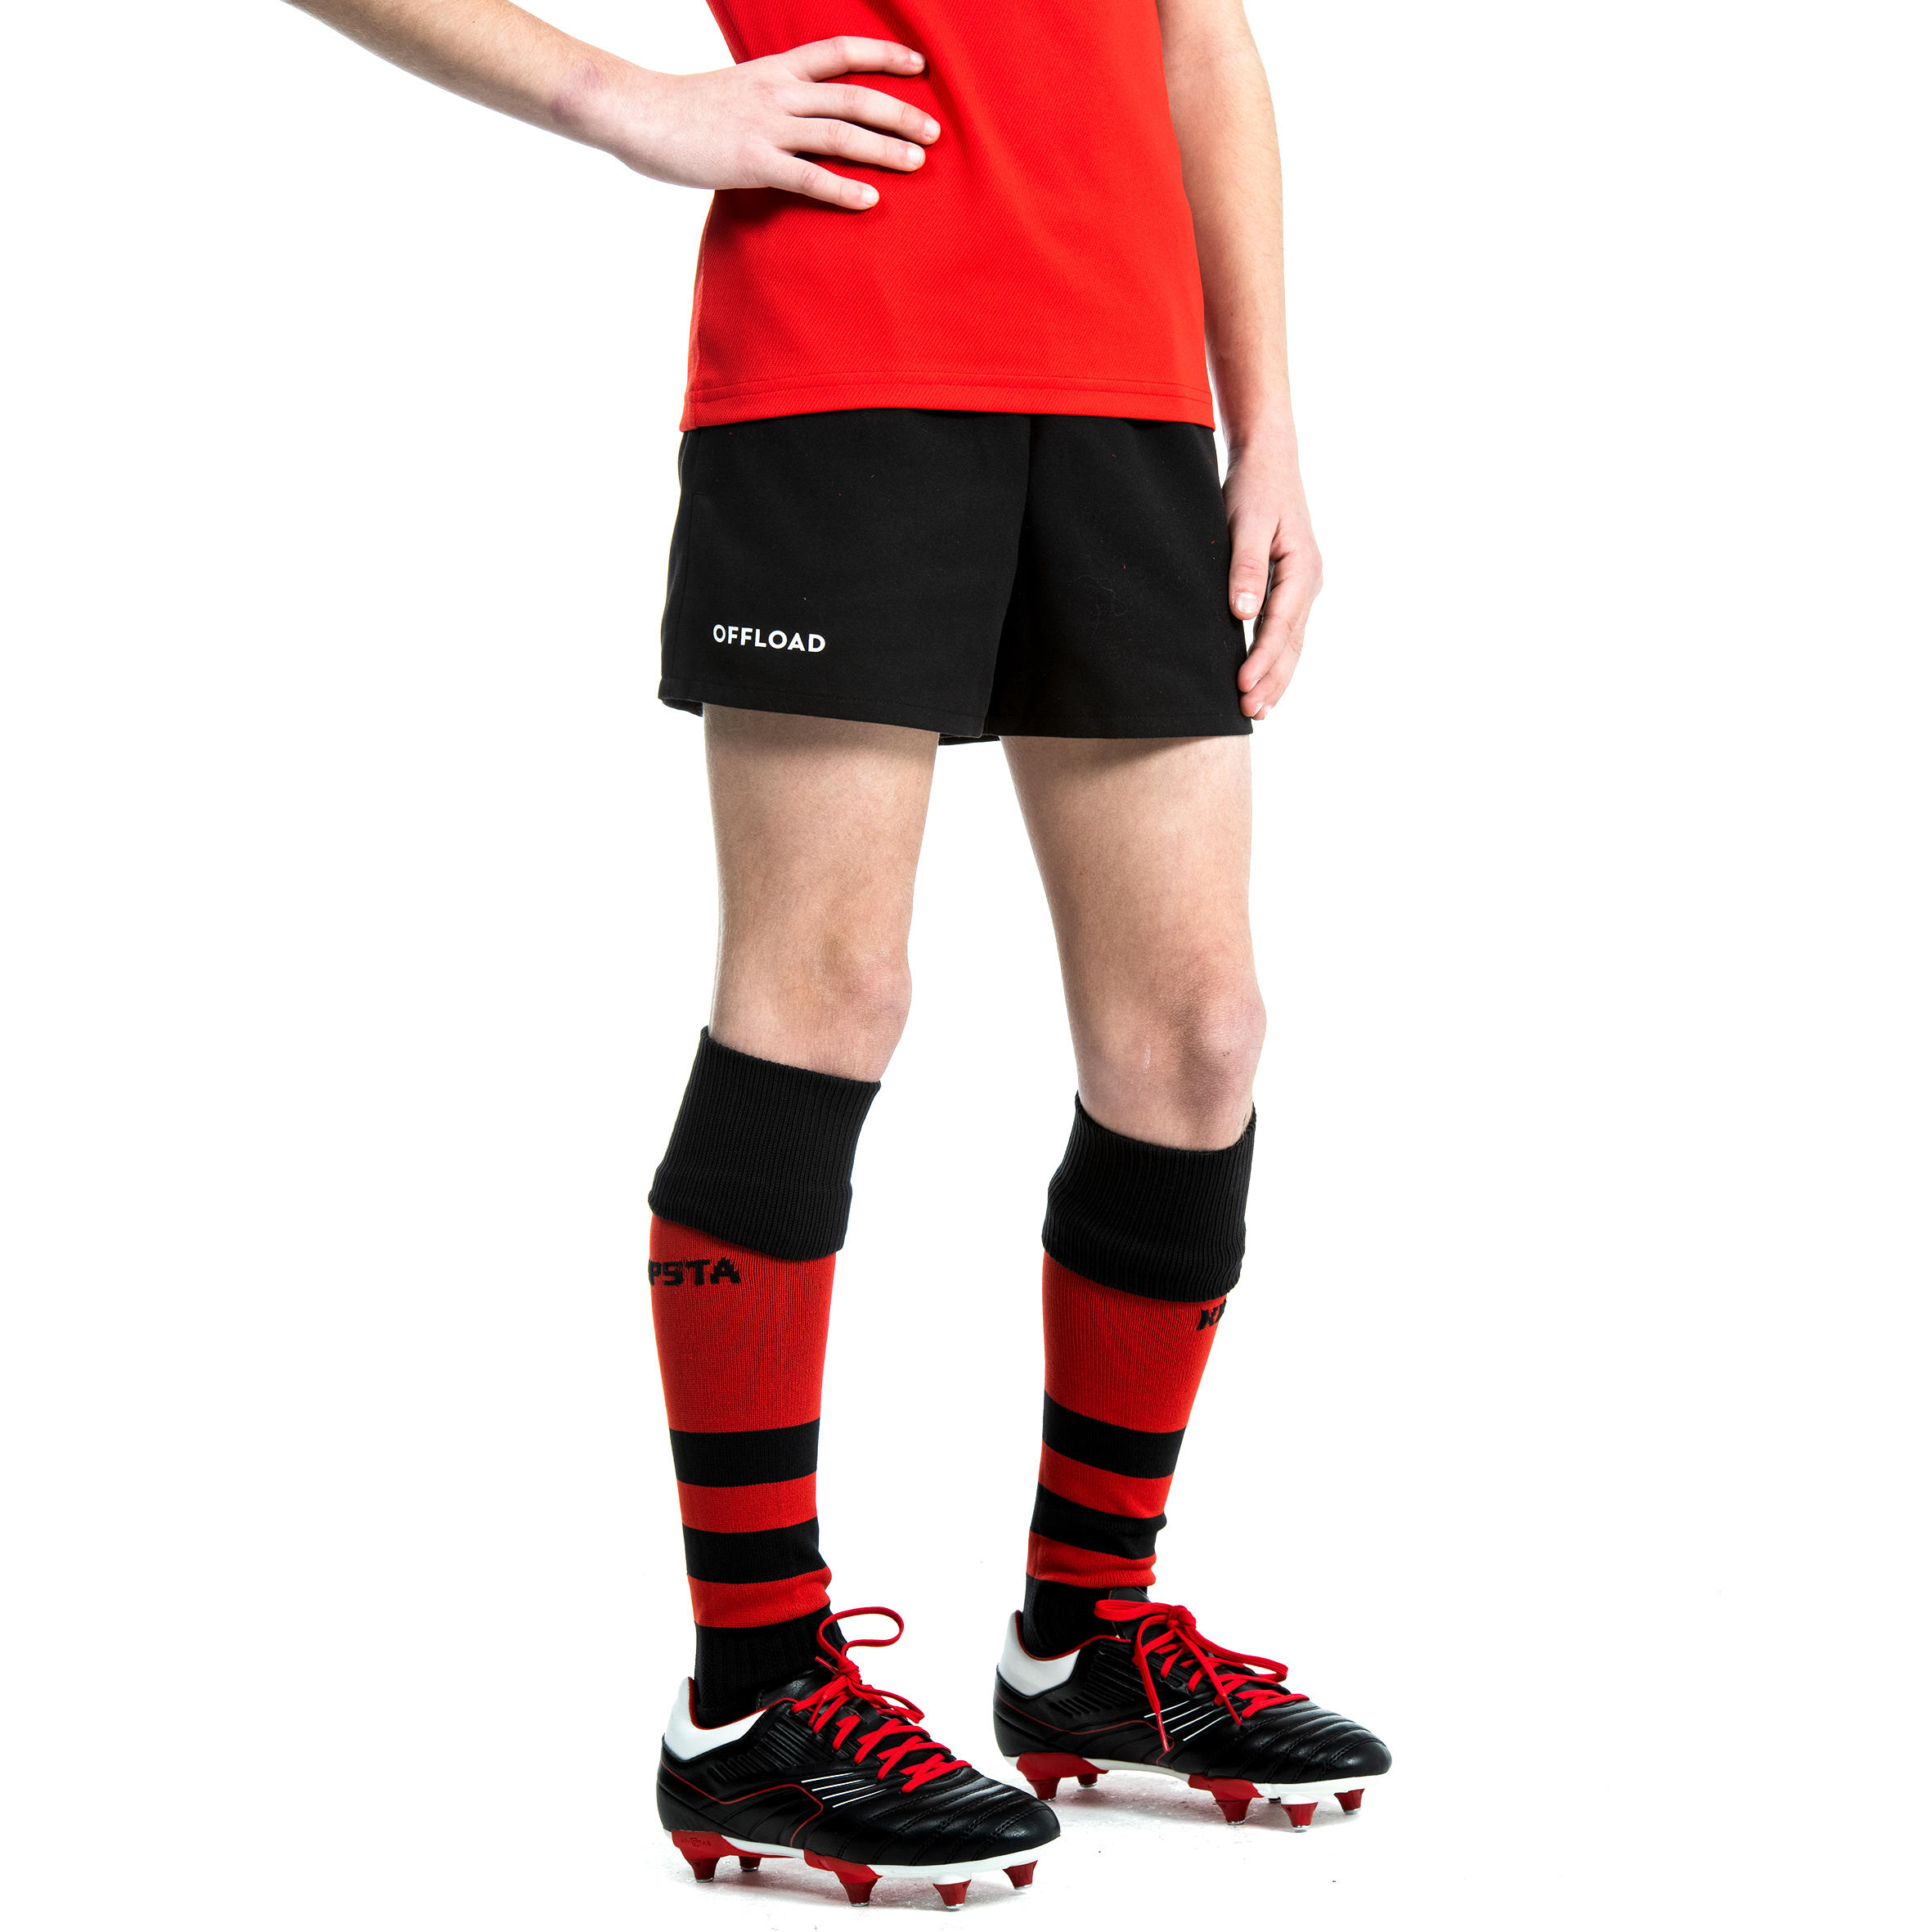 Kids' Rugby Shorts with Pockets R100 - Black 5/7